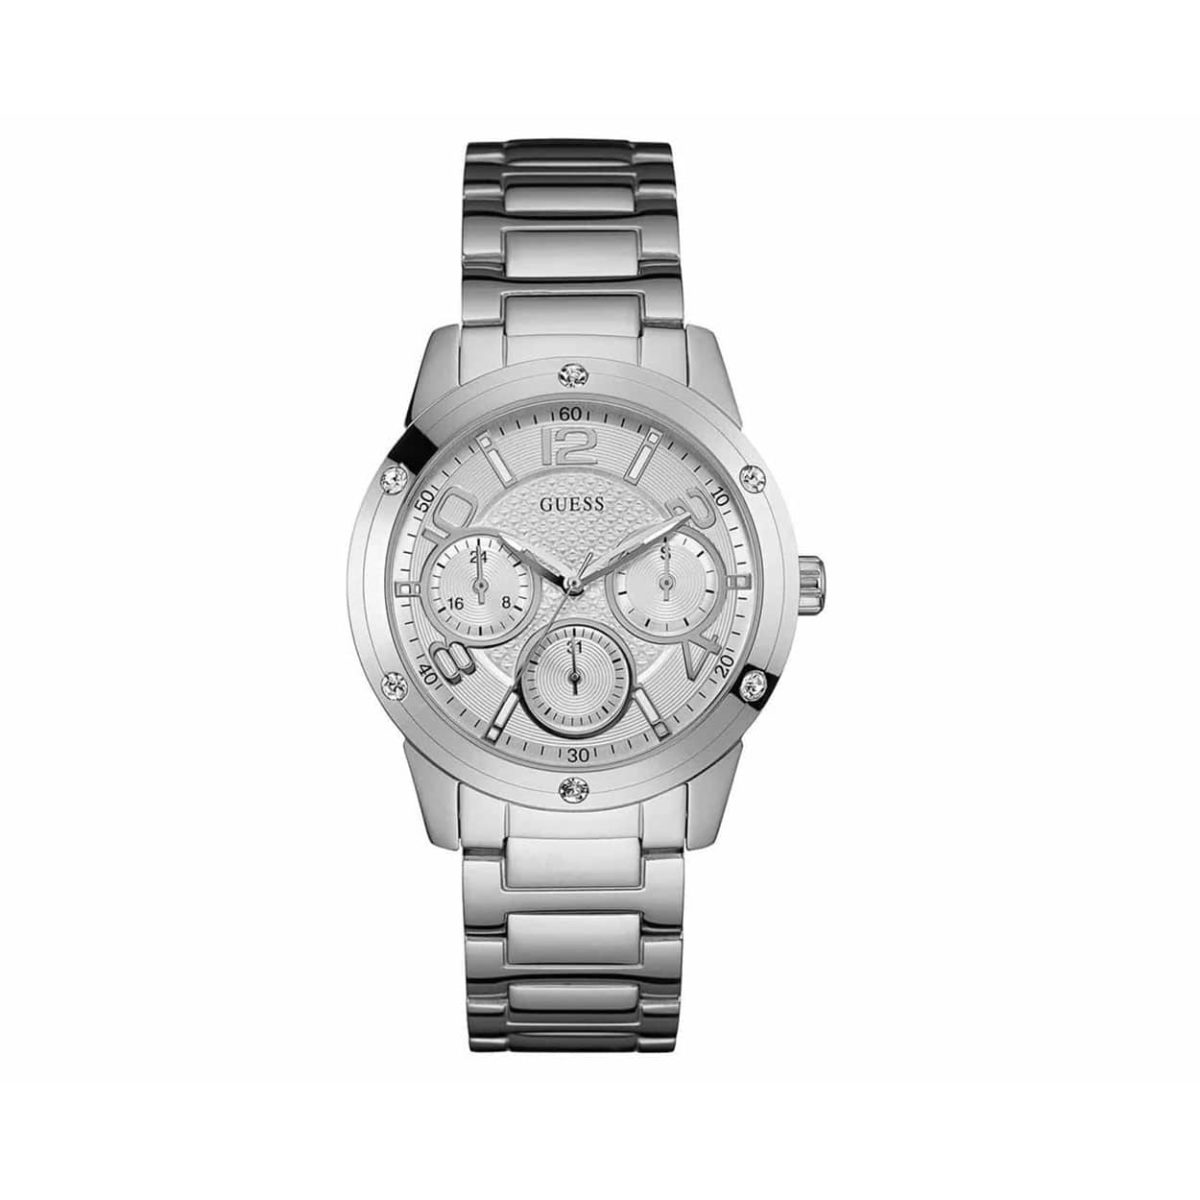 Guess Crystals Multi-function Stainless Steel Bracelet Women's Watch - W0778L1